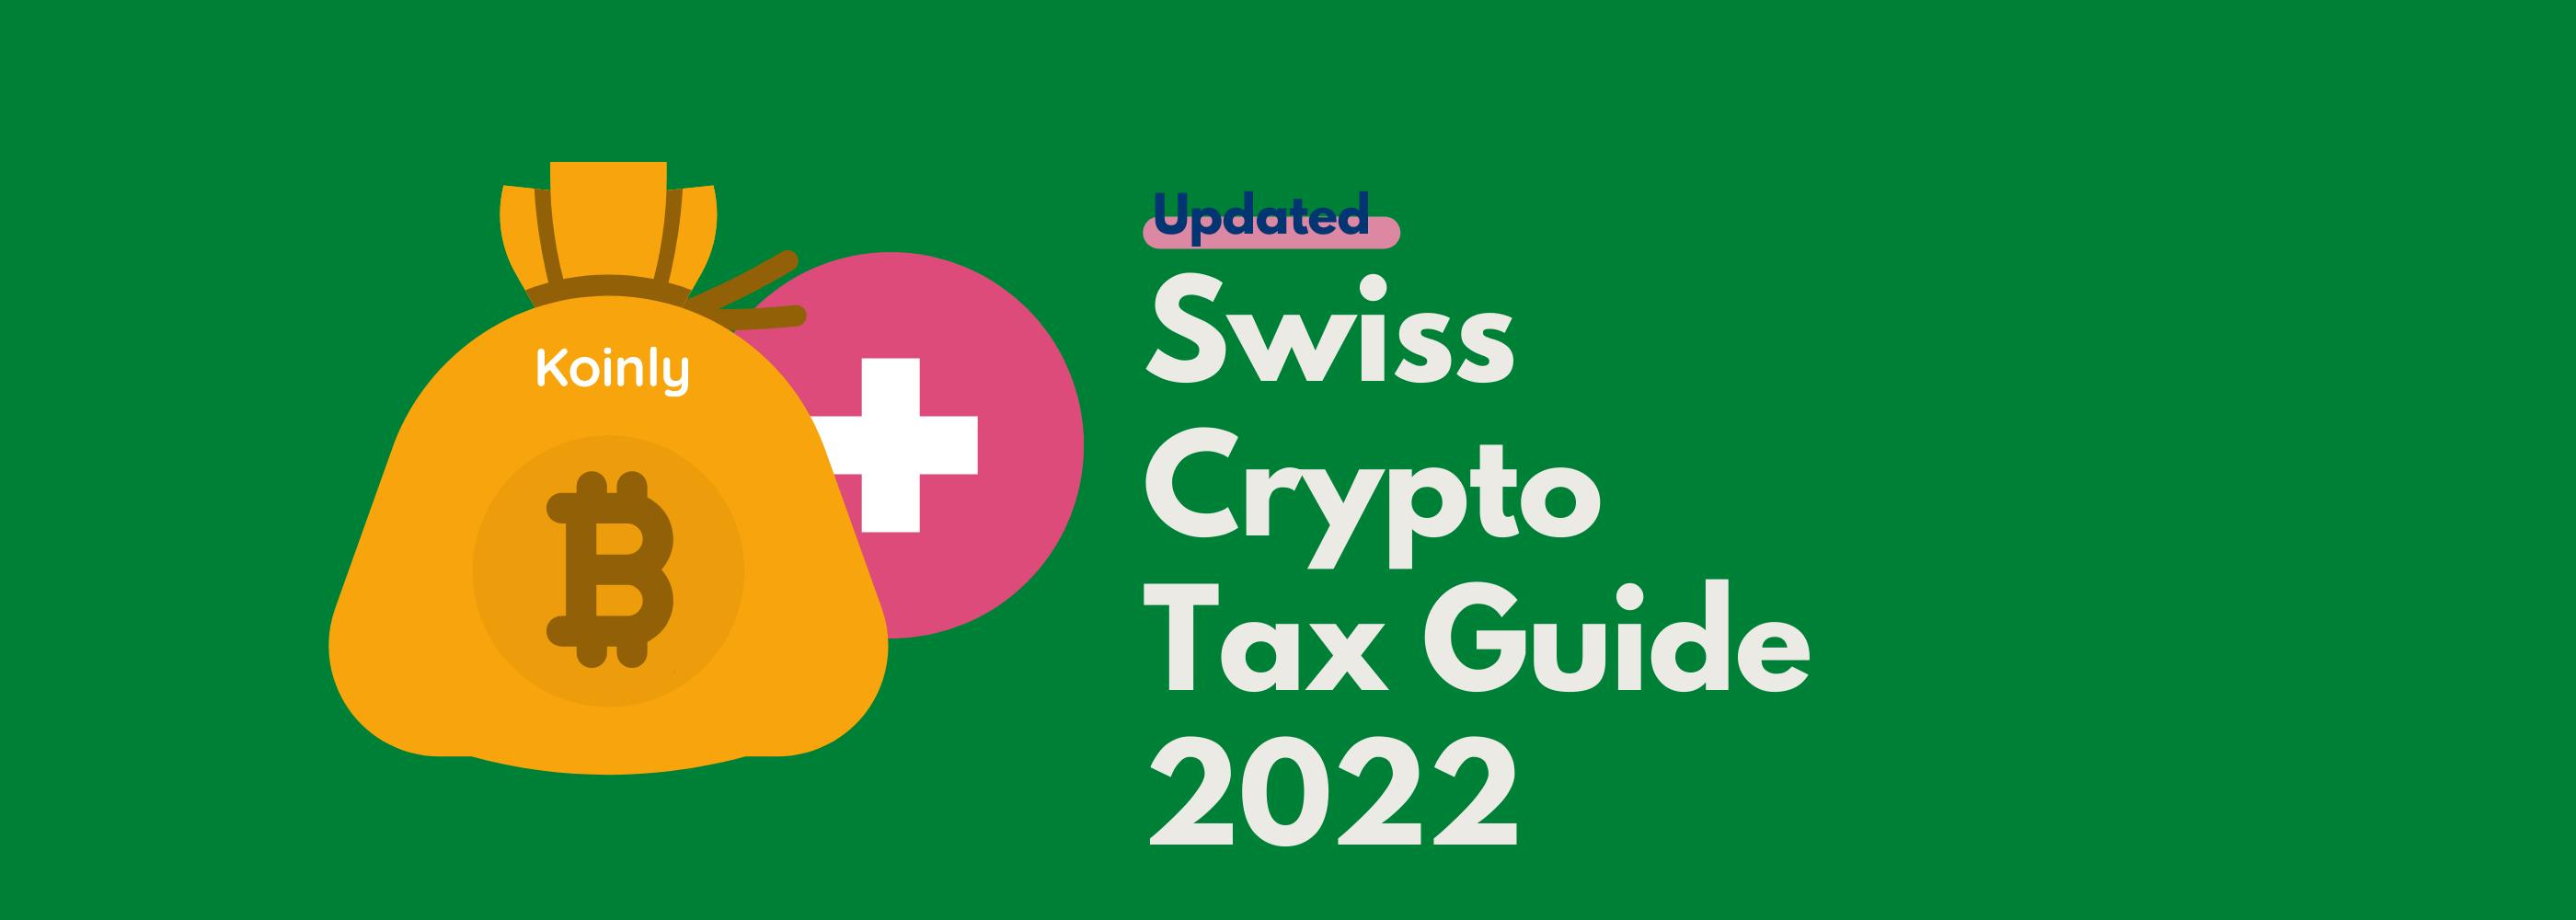 Koinly crypto tax guide Switzerland